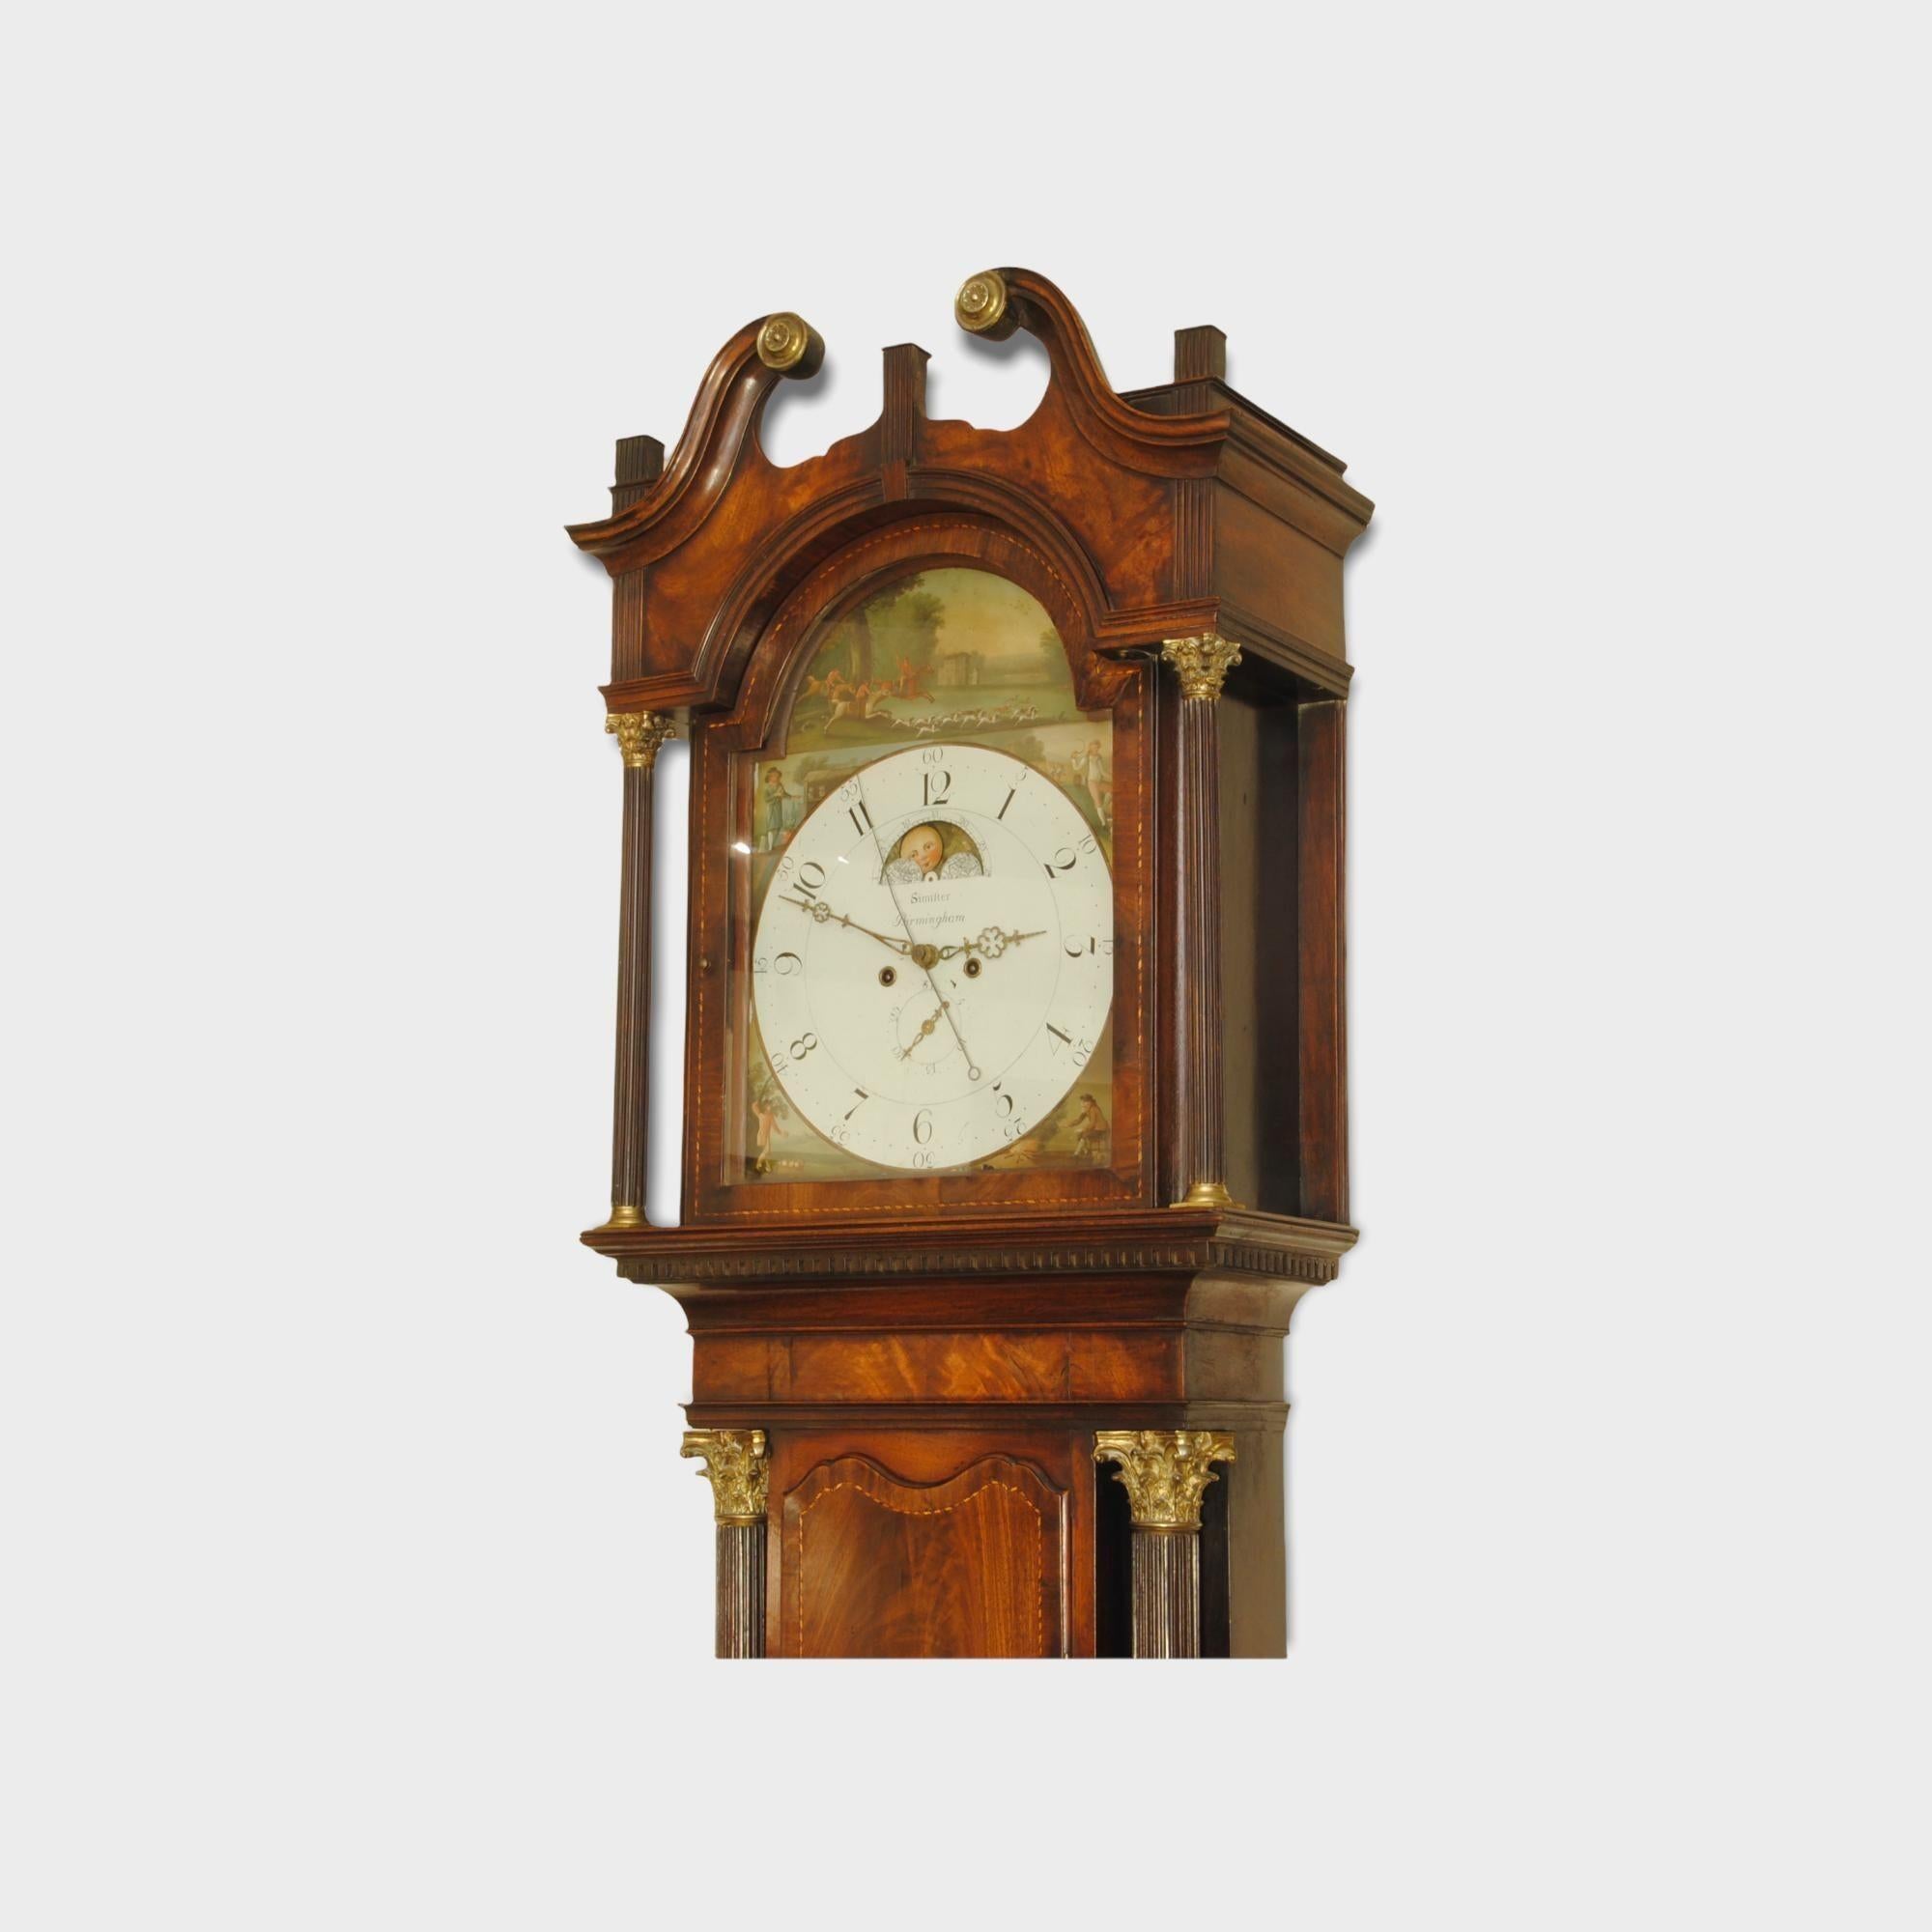 An imposing 18th century eight day long case clock by Simister of Birmingham. The amazing mahogany case has a flame mahogany veneered door and the large reeded columns with ormolu mounts to the top. The whole case inlaid with bandings and stringing.